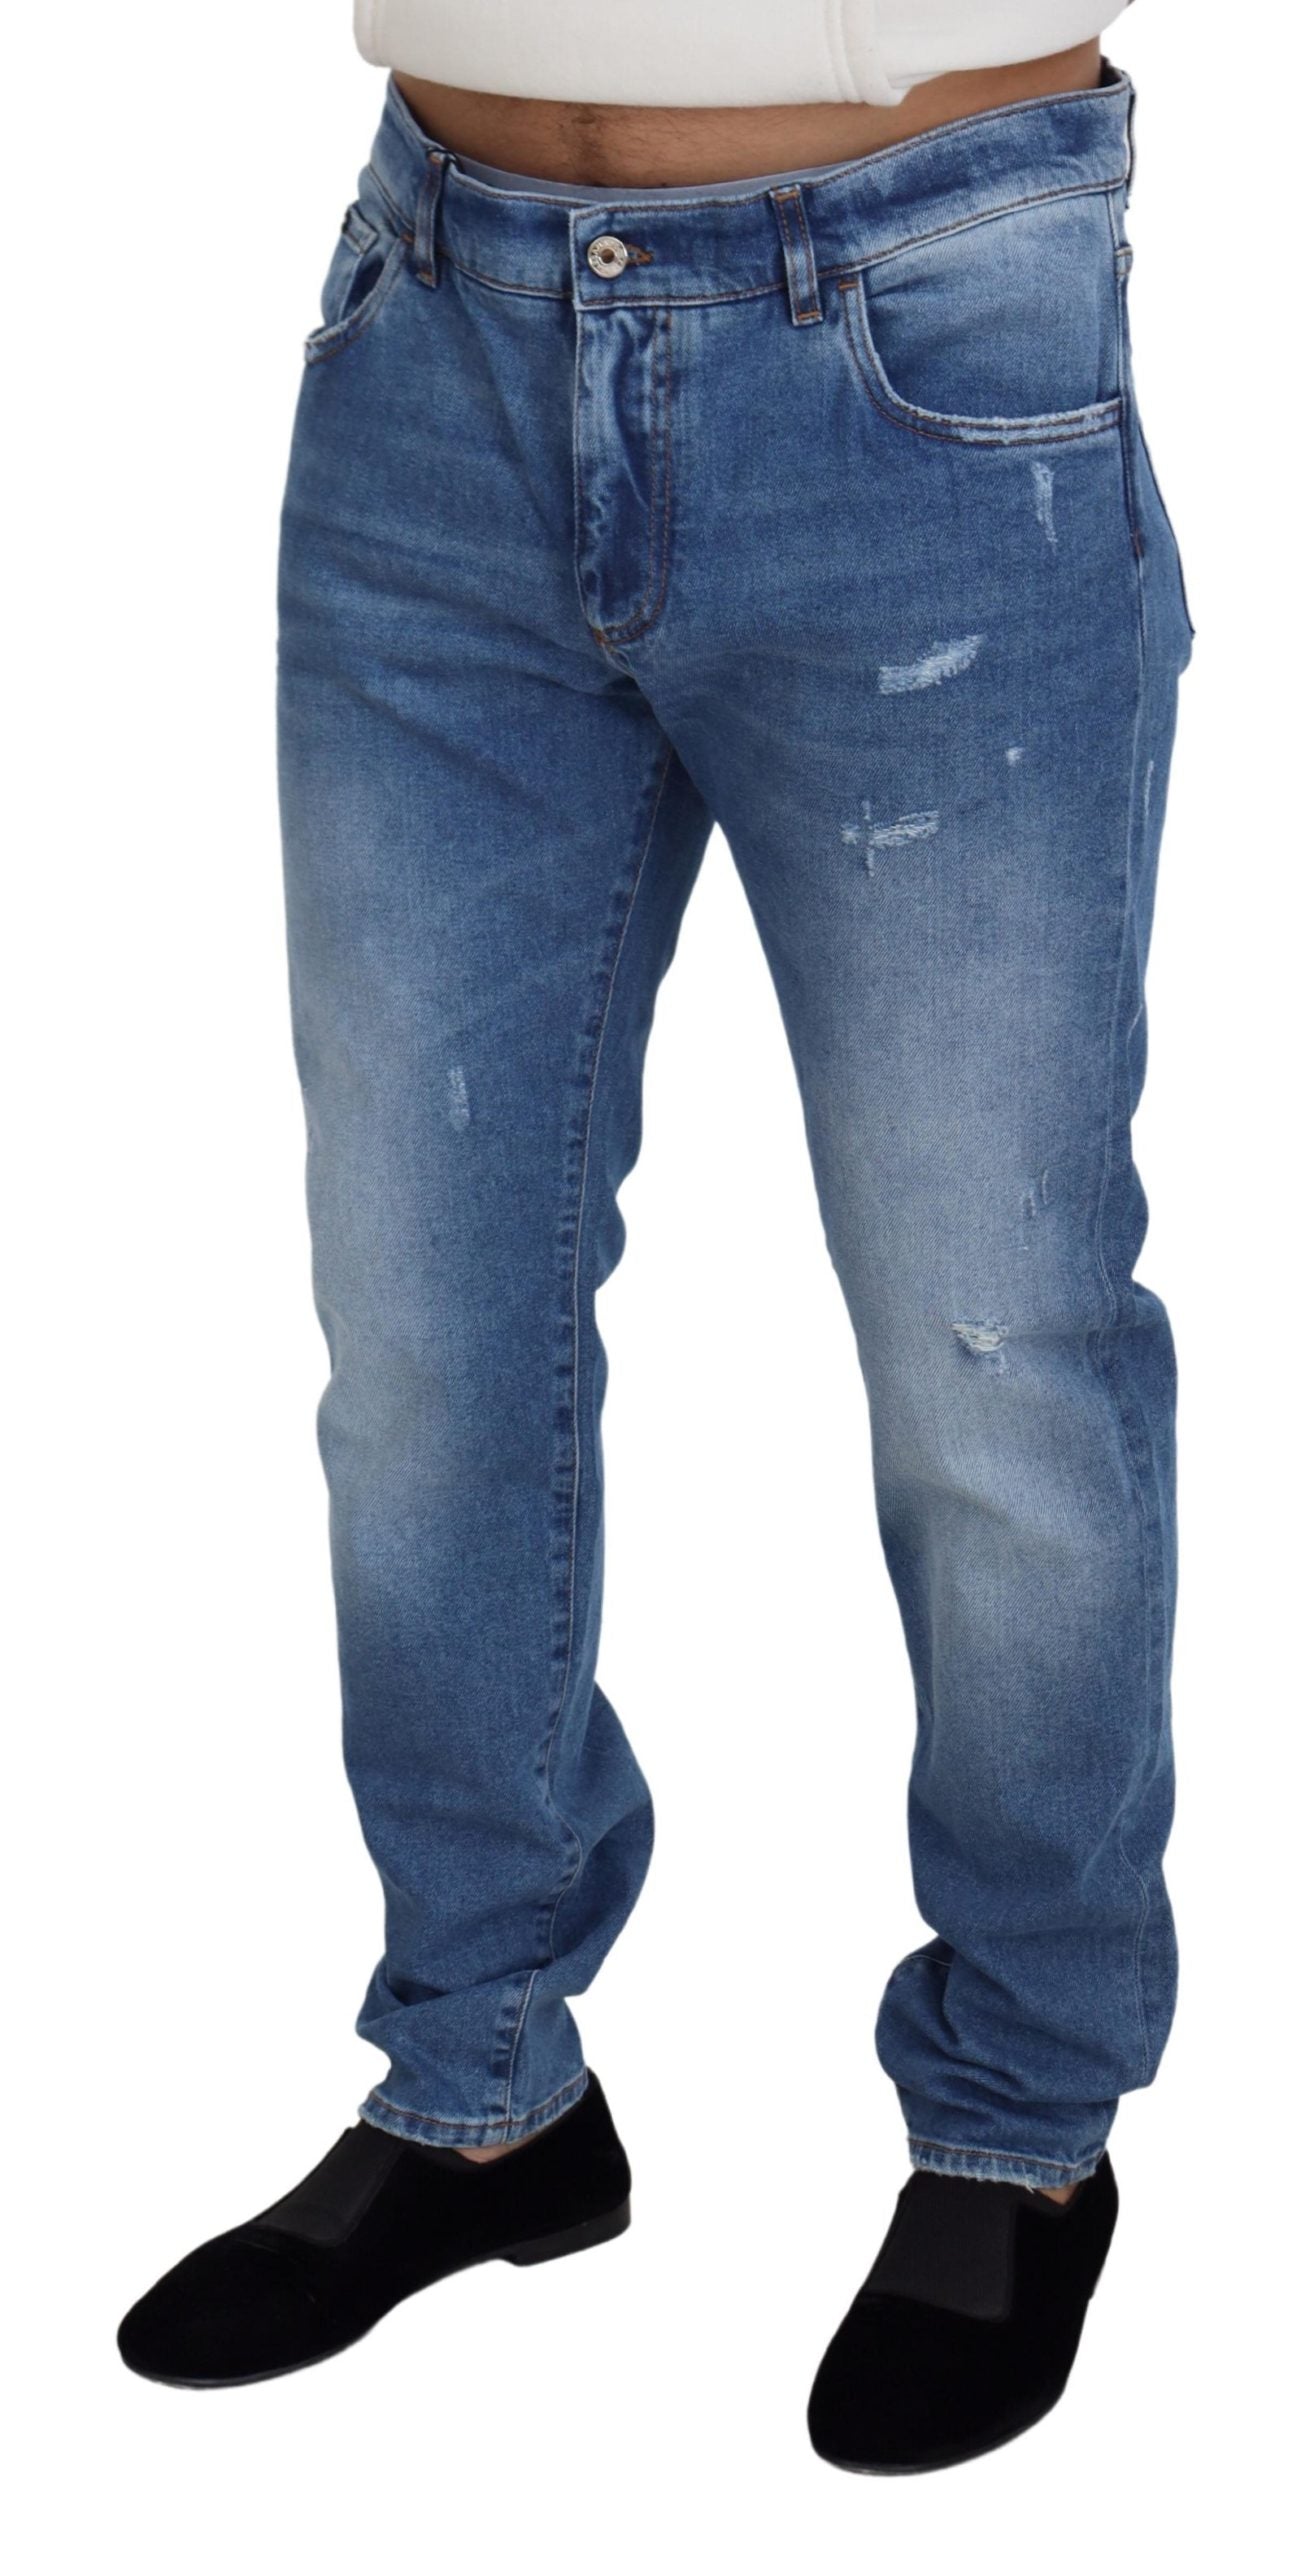 Blue Washed Cotton Casual Denim Jeans